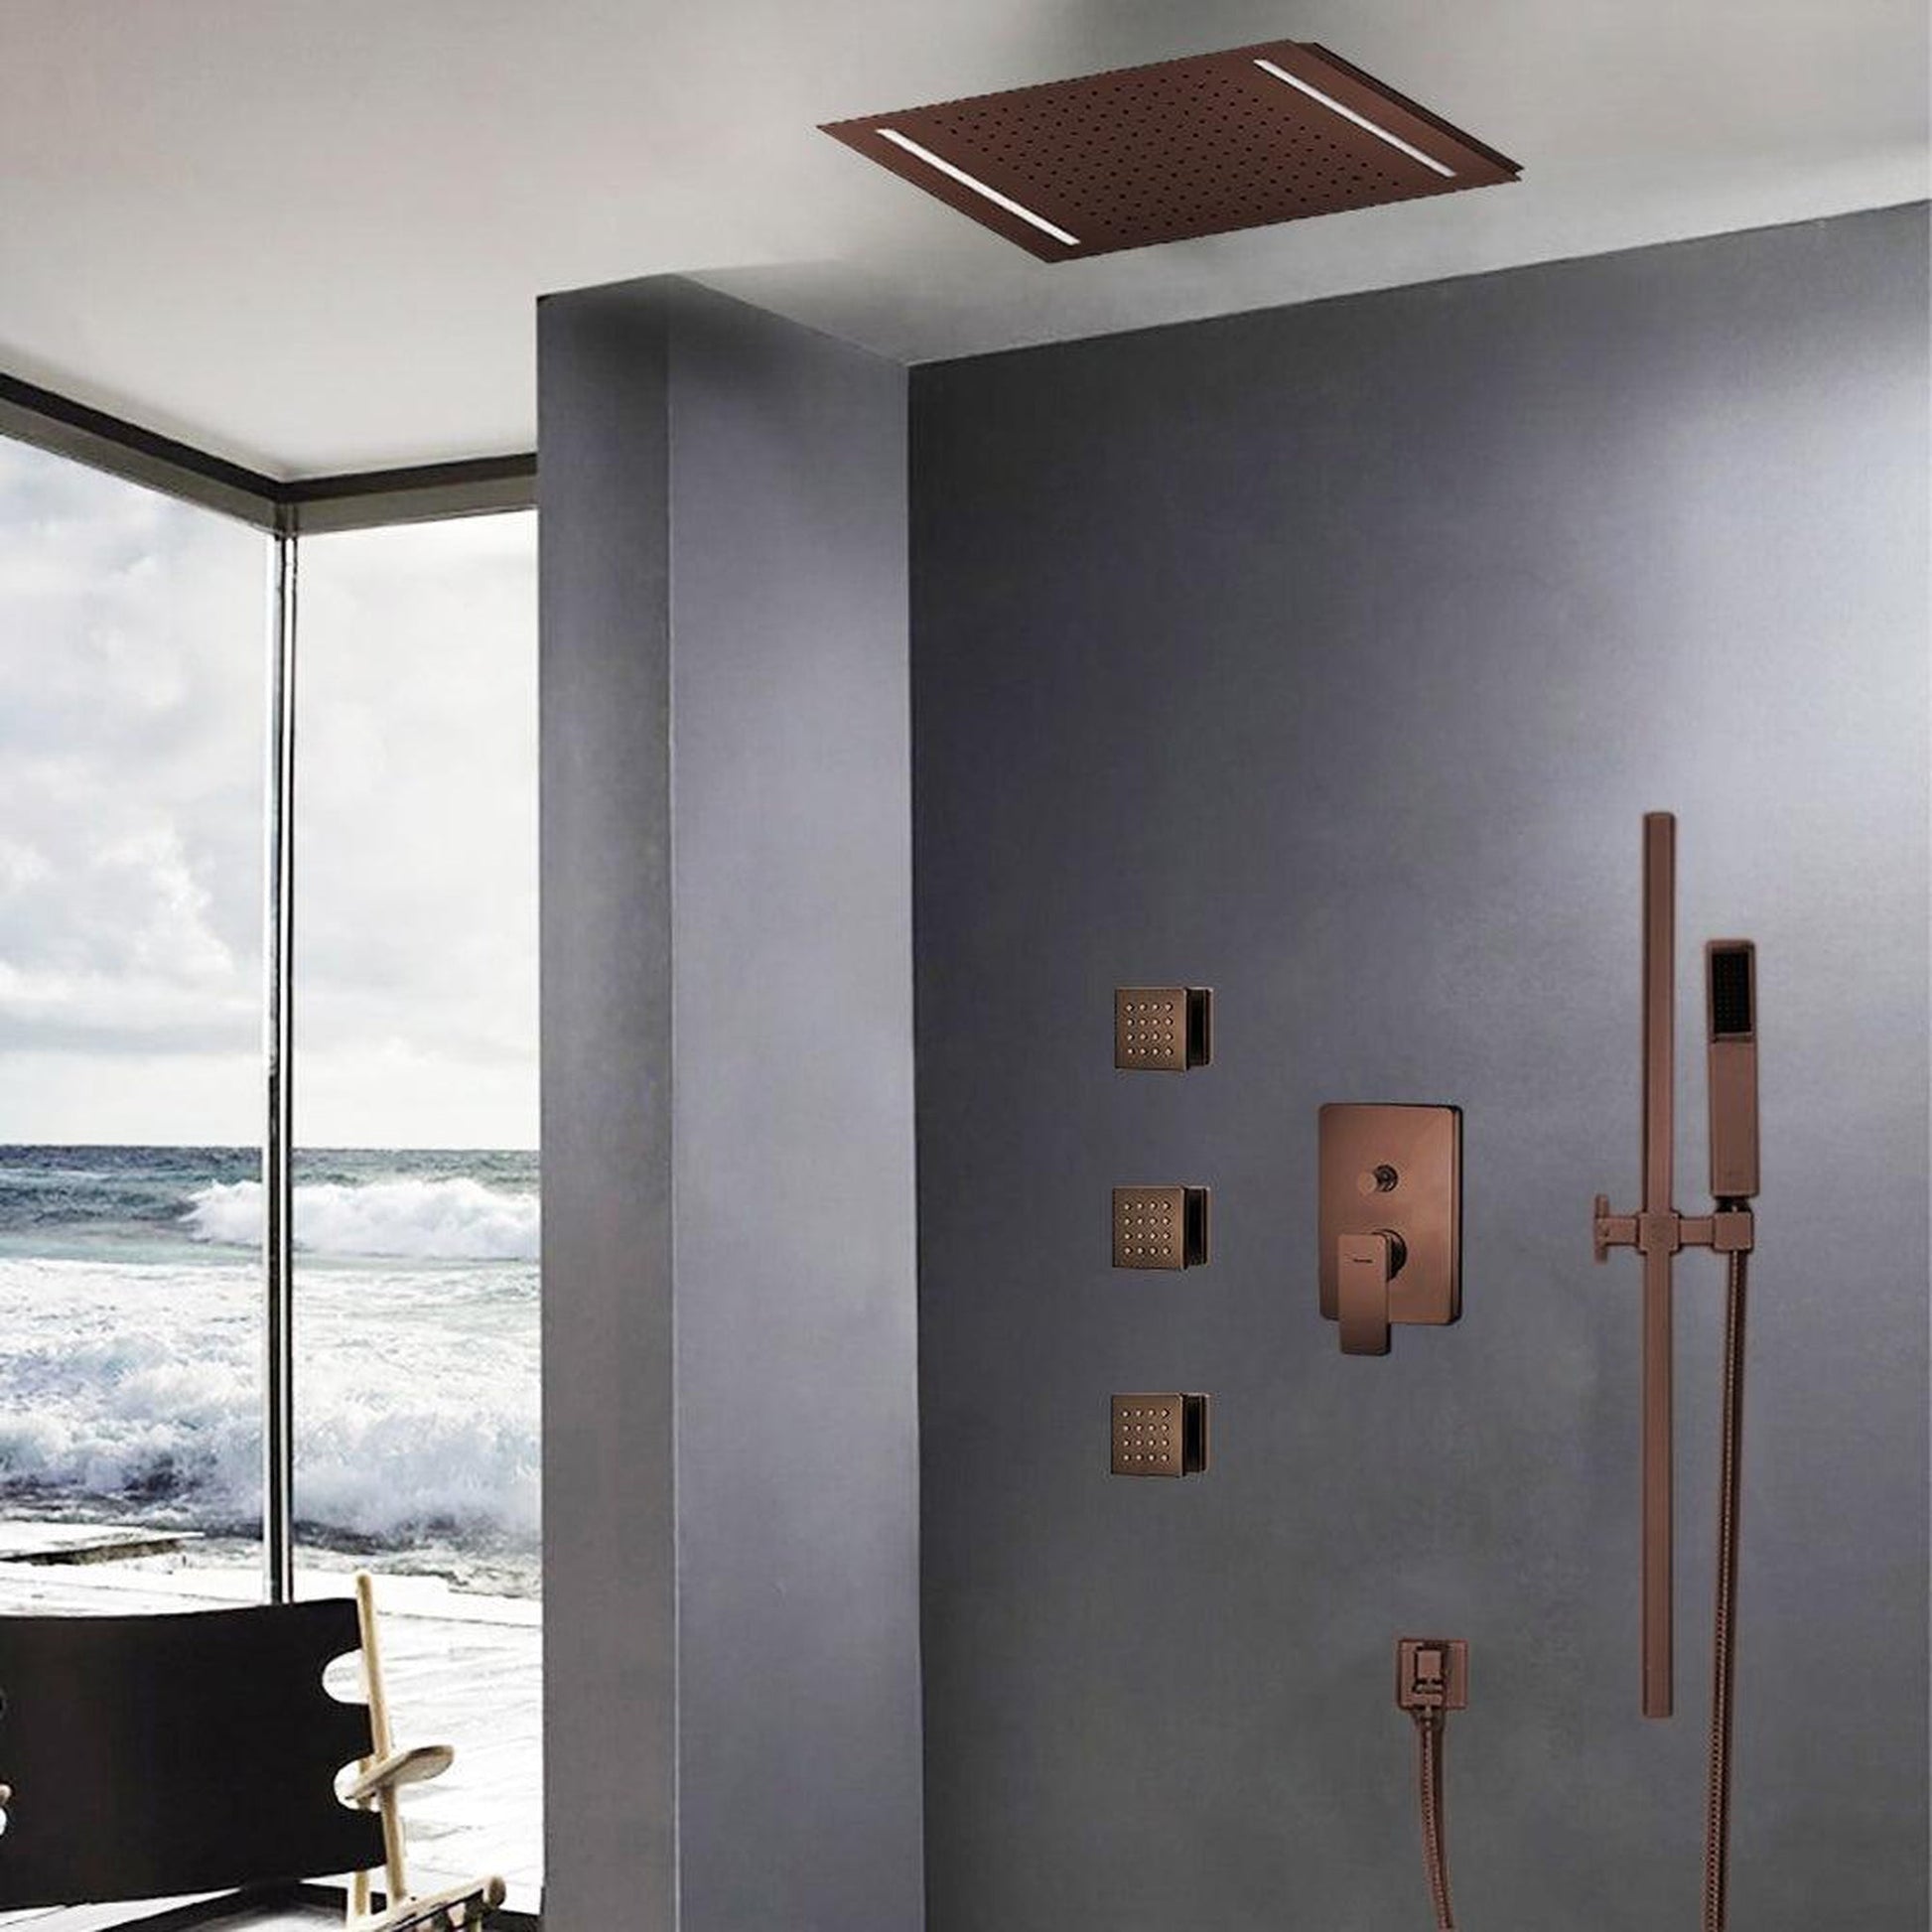 Fontana Creative Luxury Light Oil Rubbed Bronze Rectangular Ceiling Mounted Bravat LED Touch Control Rainfall Shower System With 3-Jet Body Sprays and Hand Shower